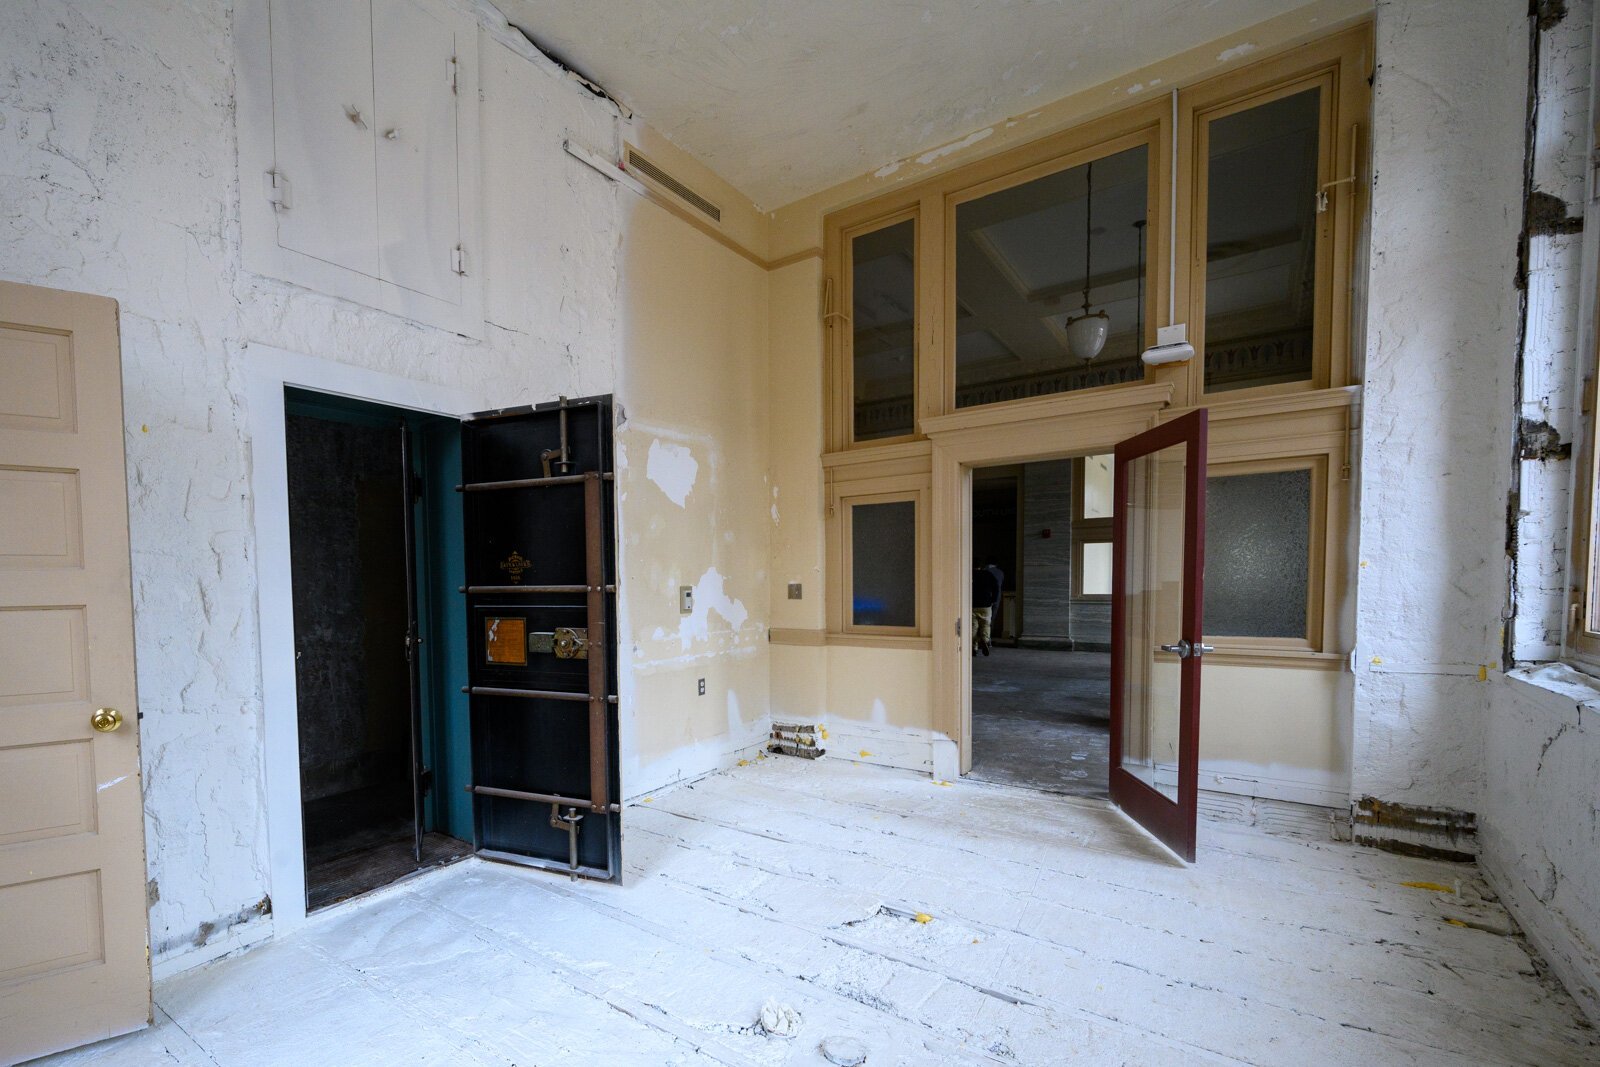 The ground floor of the YDL Michigan Avenue branch during remediation.